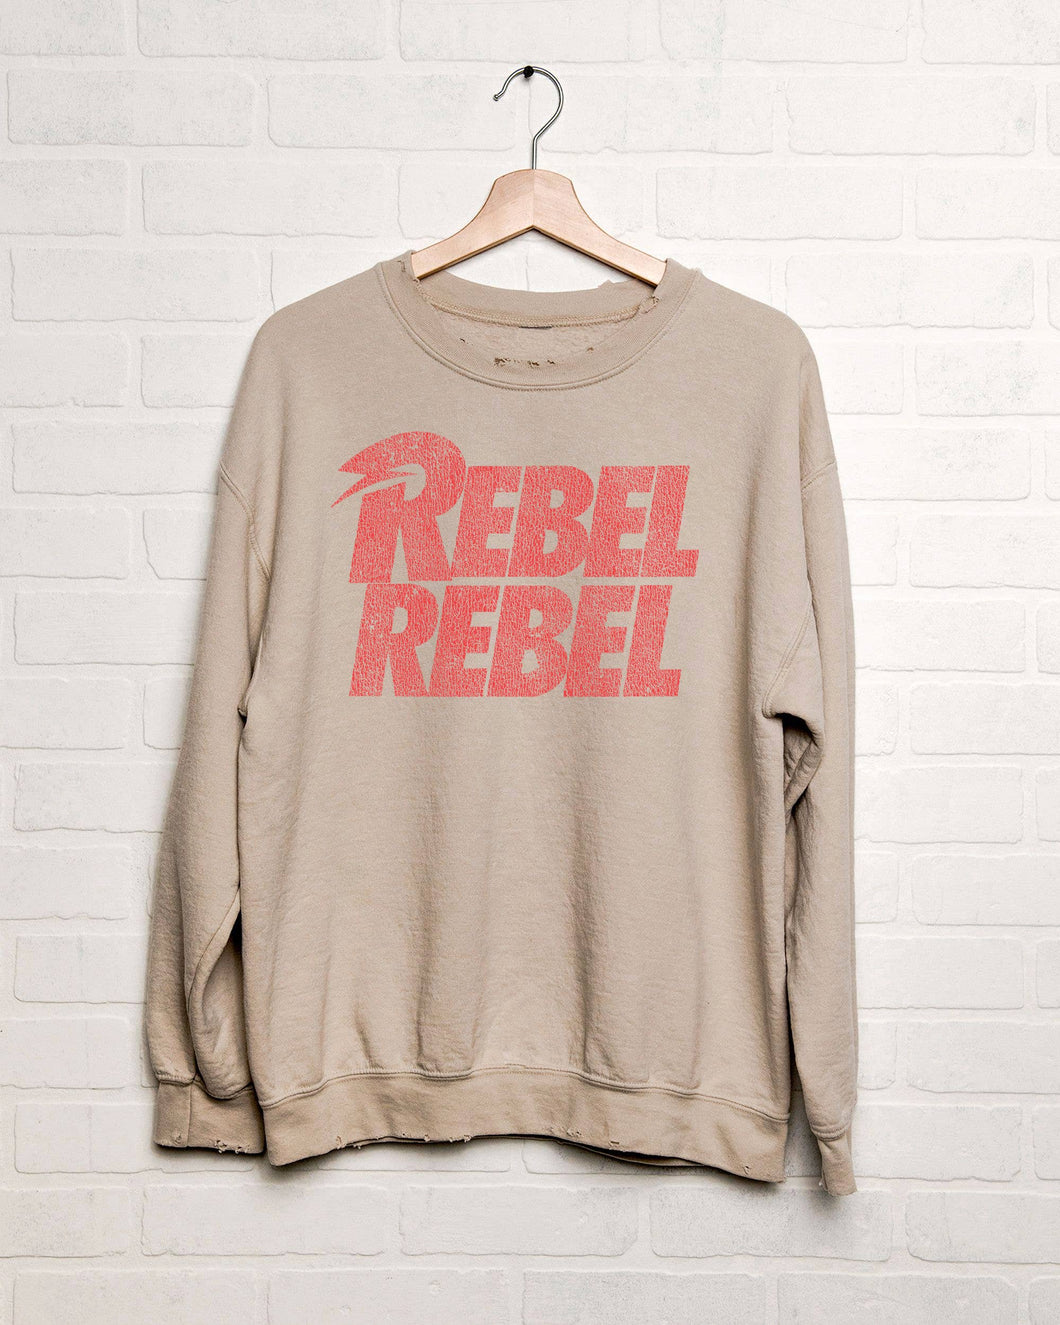 David Bowie Rebel Repeat Sand Thrifted Graphic Sweatshirt